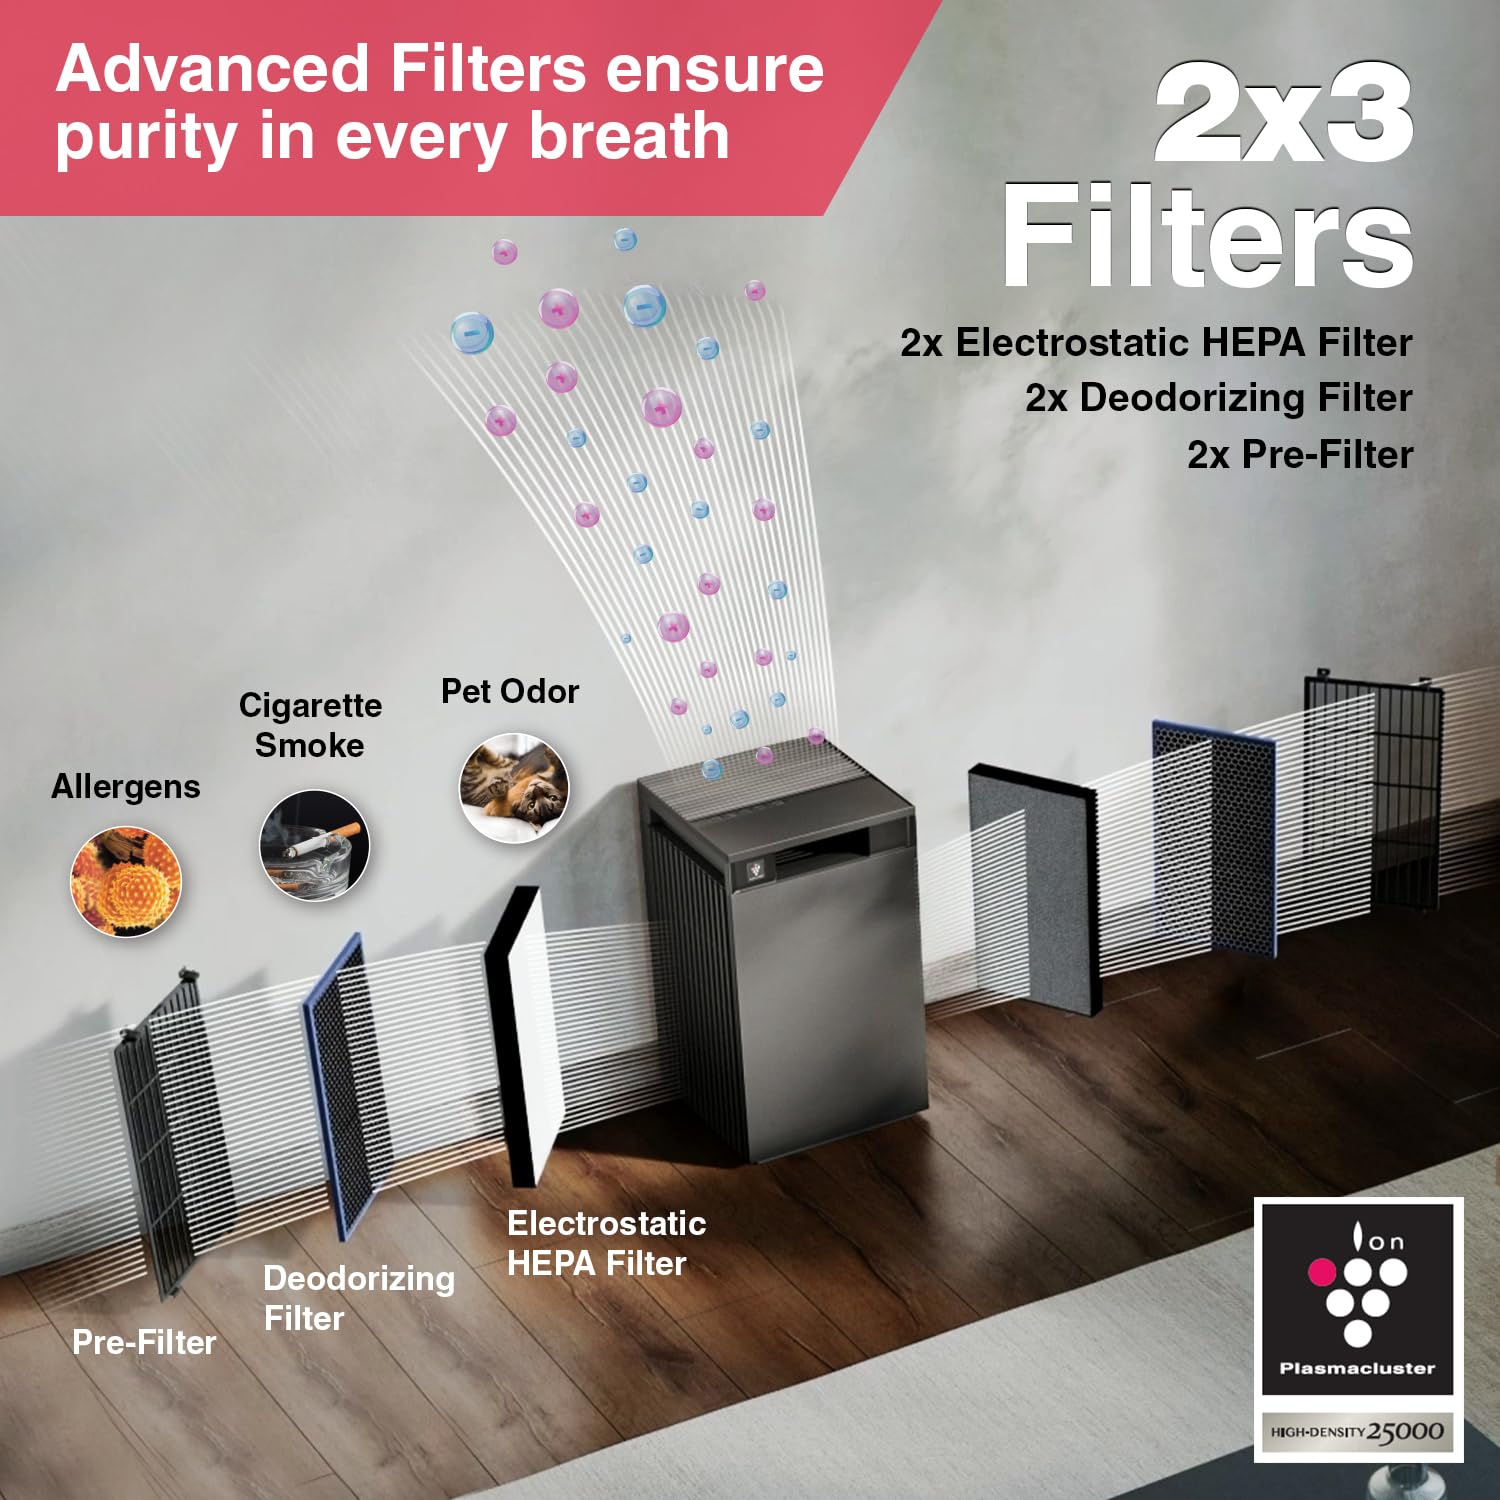 SHARP FX-S120M-H Air Purifier for Home | Wi-Fi Connectivity, Remote Operation Capability, PM 2.5 Display Mahajan Electronics Online